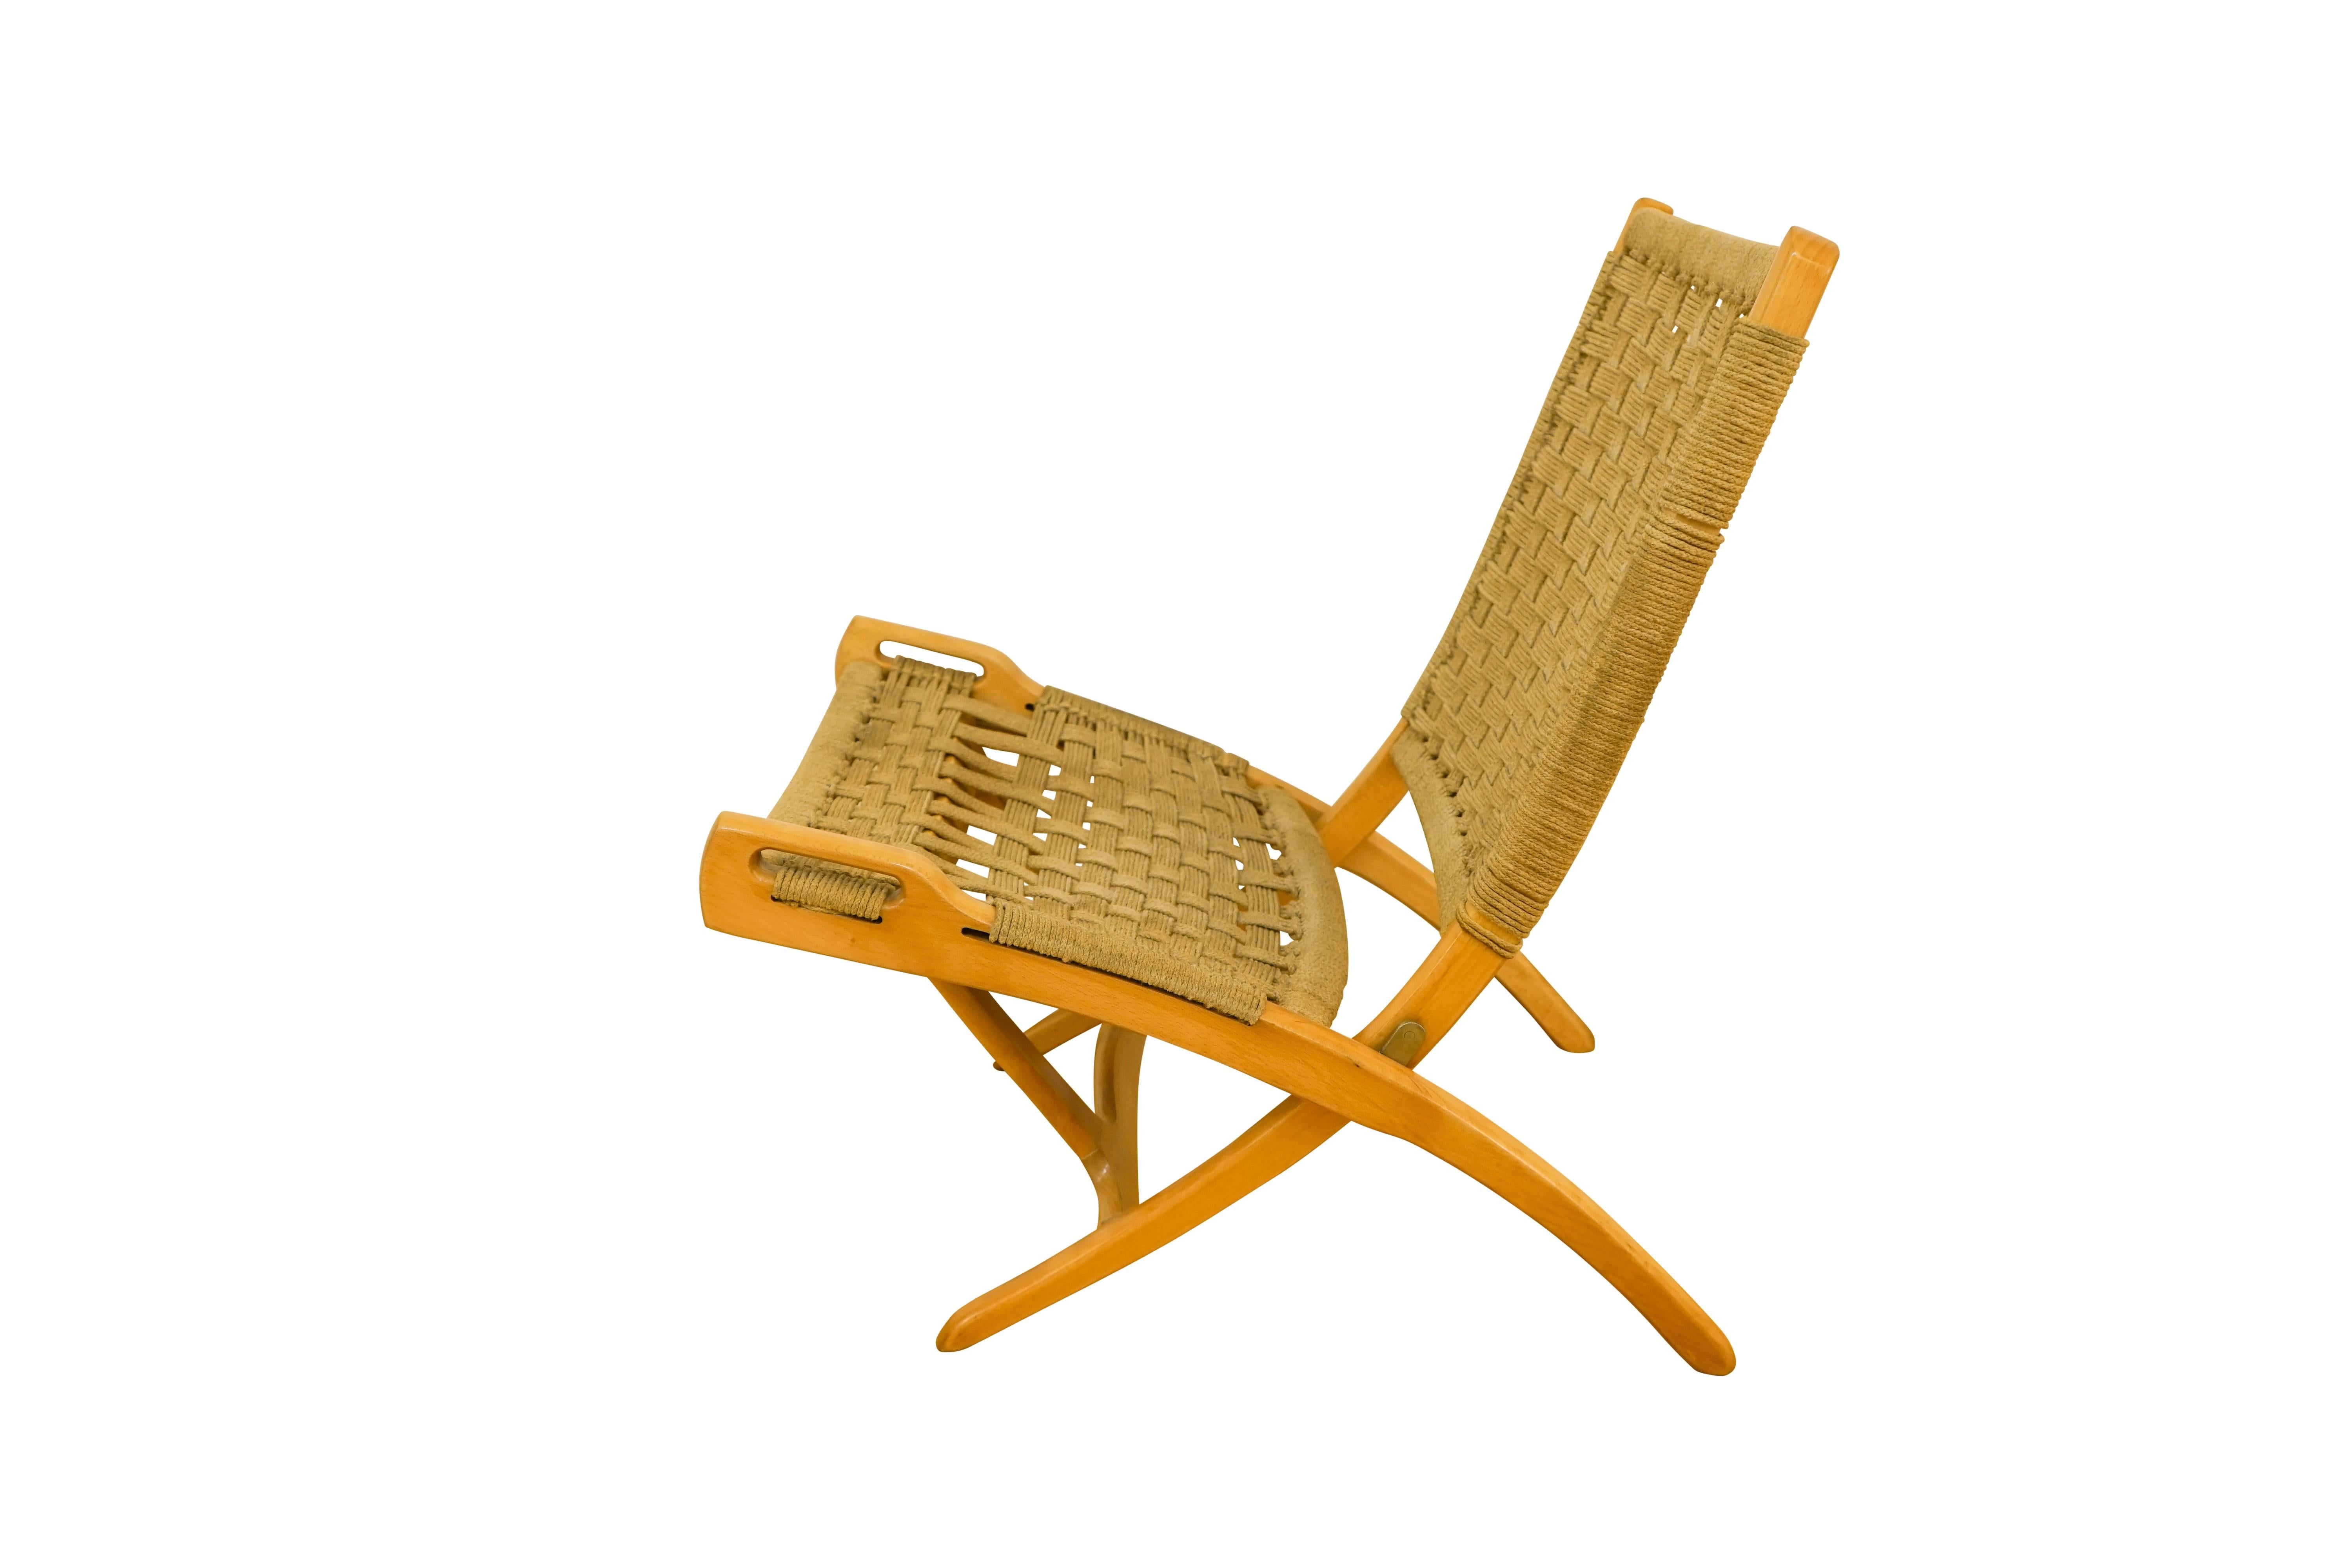 A super comfortable folding chair, perfect for a solarium or the beach, the design of which is in the style of Hans Wegner. Crafted of hewn oak and upholstered in the original sisal webbing, the chair folds for easy transport, and is designed to